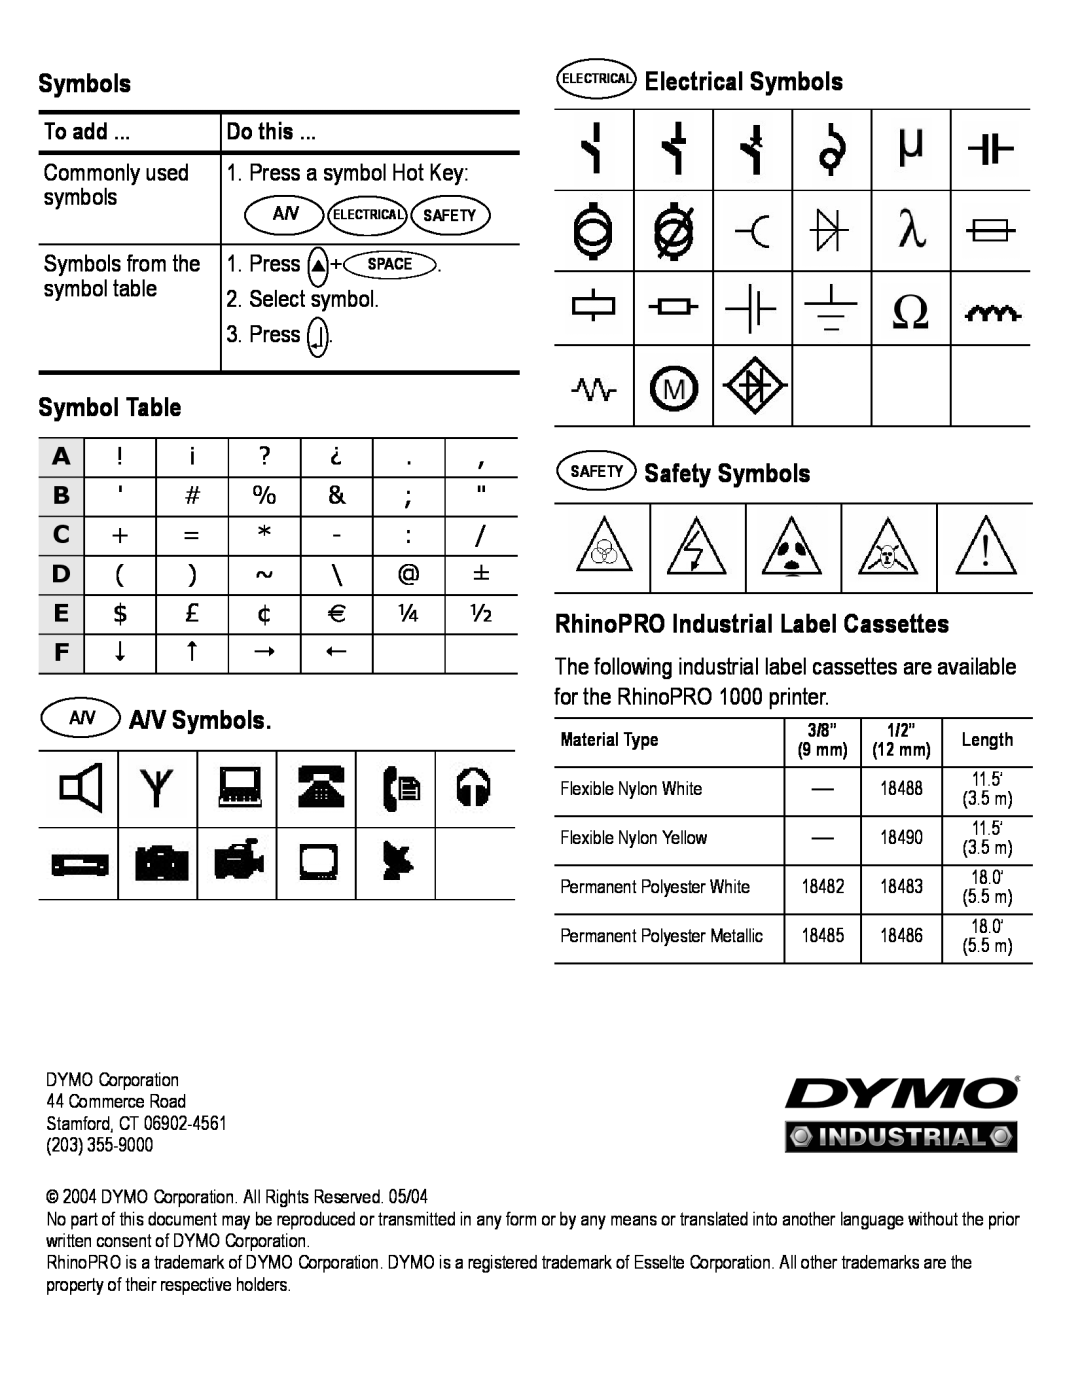 Dymo 1000 ELECTRICAL Electrical Symbols, A/V Symbols, SAFETY Safety Symbols RhinoPRO Industrial Label Cassettes, Do this 